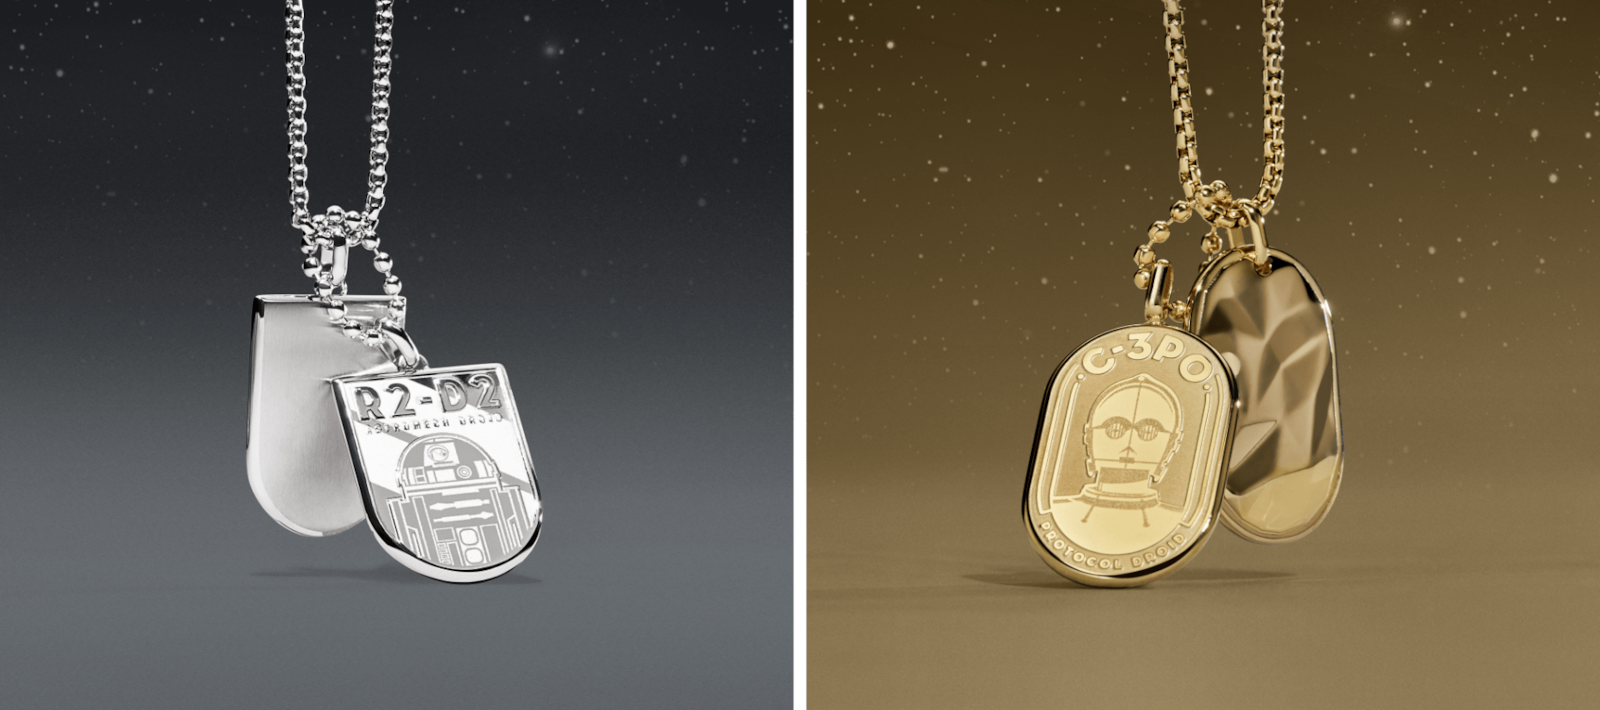 A gold-tone necklace with an engraving of C-3PO on an ID plaque and a silver-tone necklace with an engraving of R2-D2 on an ID plaque